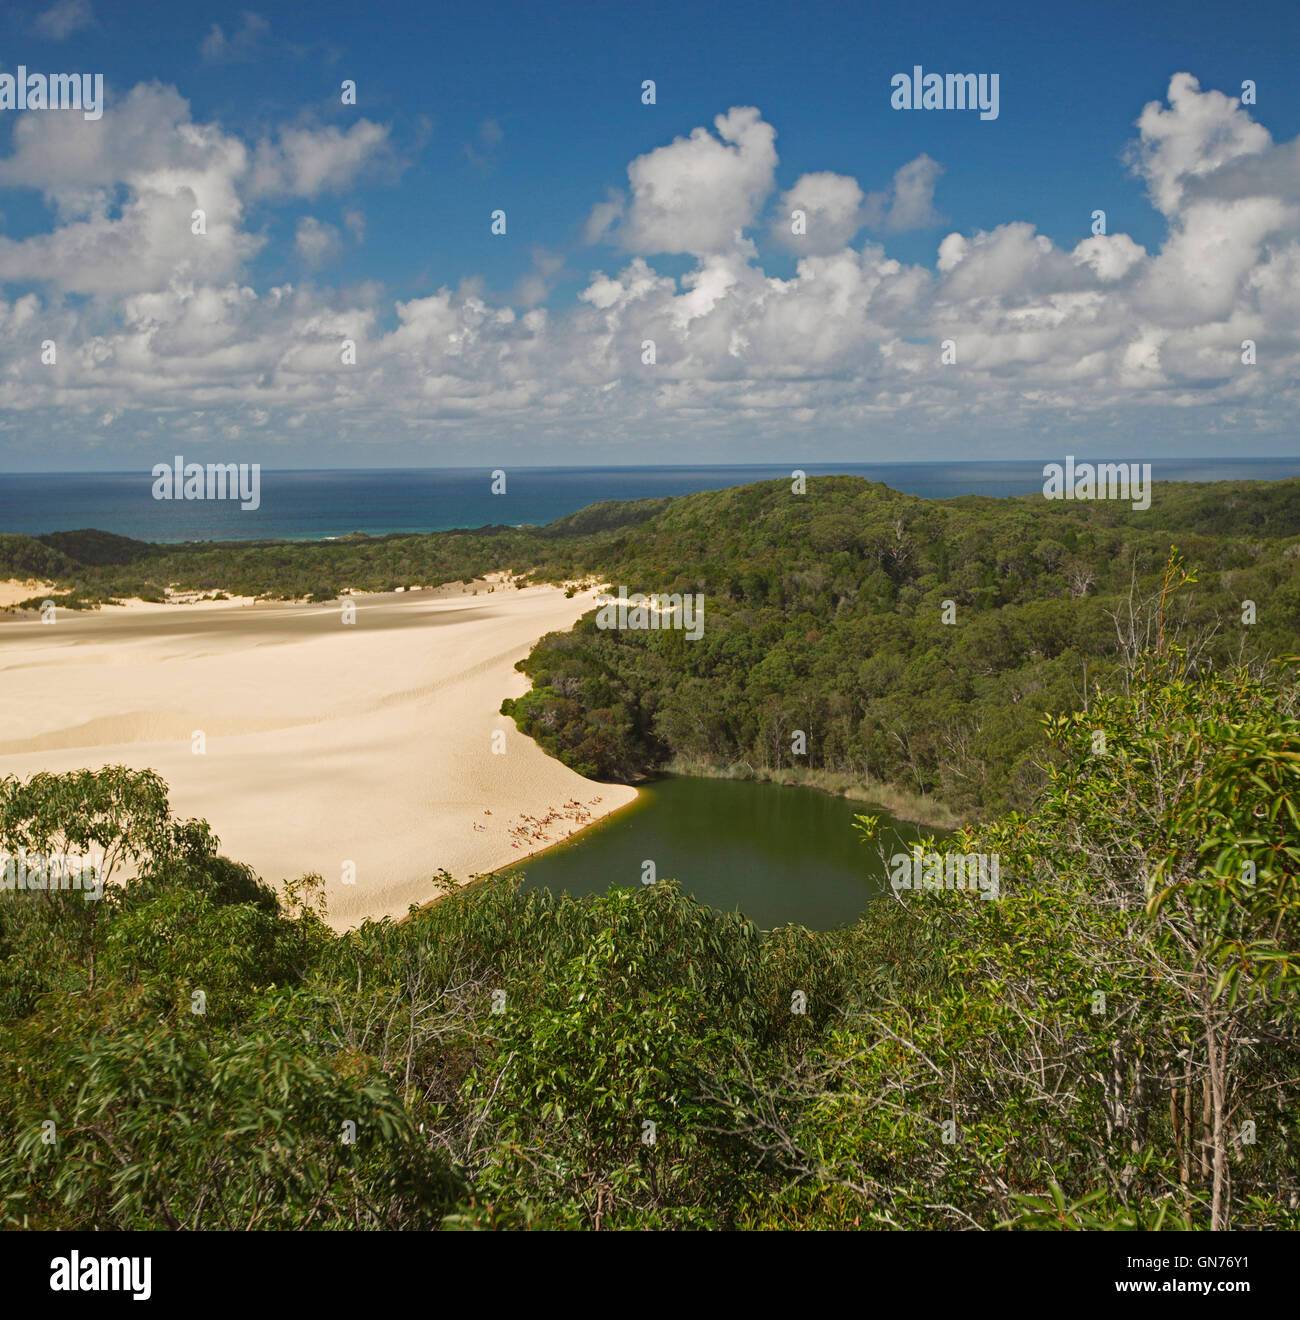 Lake Wabby at foot of Hammerstone sandblow & surrounded by dense forests with blue ocean in distance, on Fraser Island Australia Stock Photo